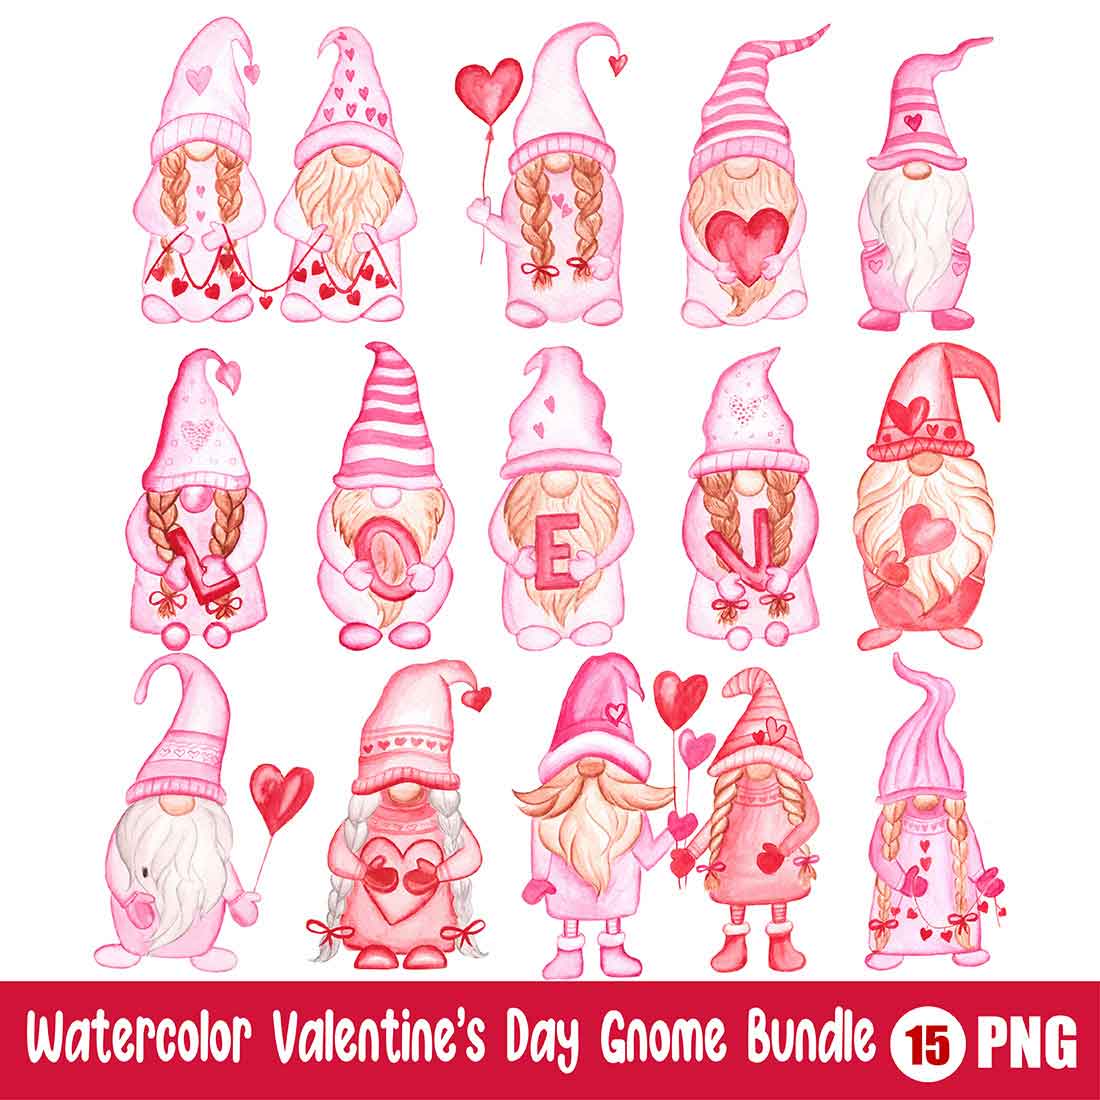 Set of cute images of gnomes for Valentines Day